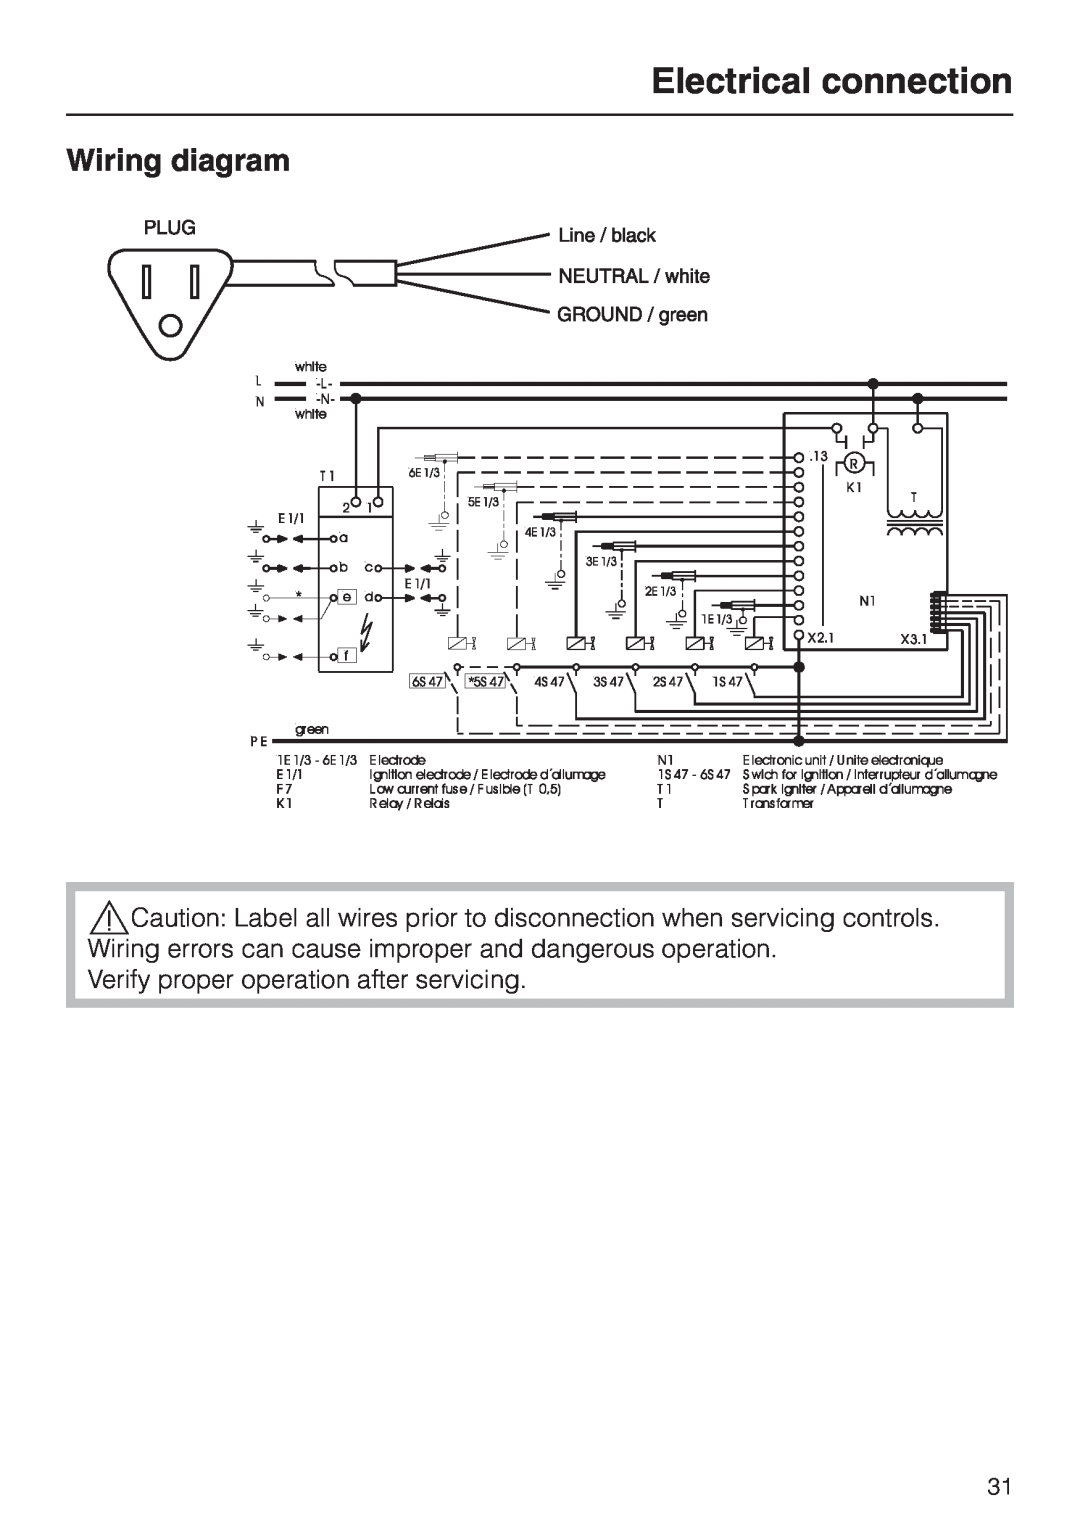 Miele KM 3485, KM 3474, KM 3484 Wiring diagram, Electrical connection, Verify proper operation after servicing 